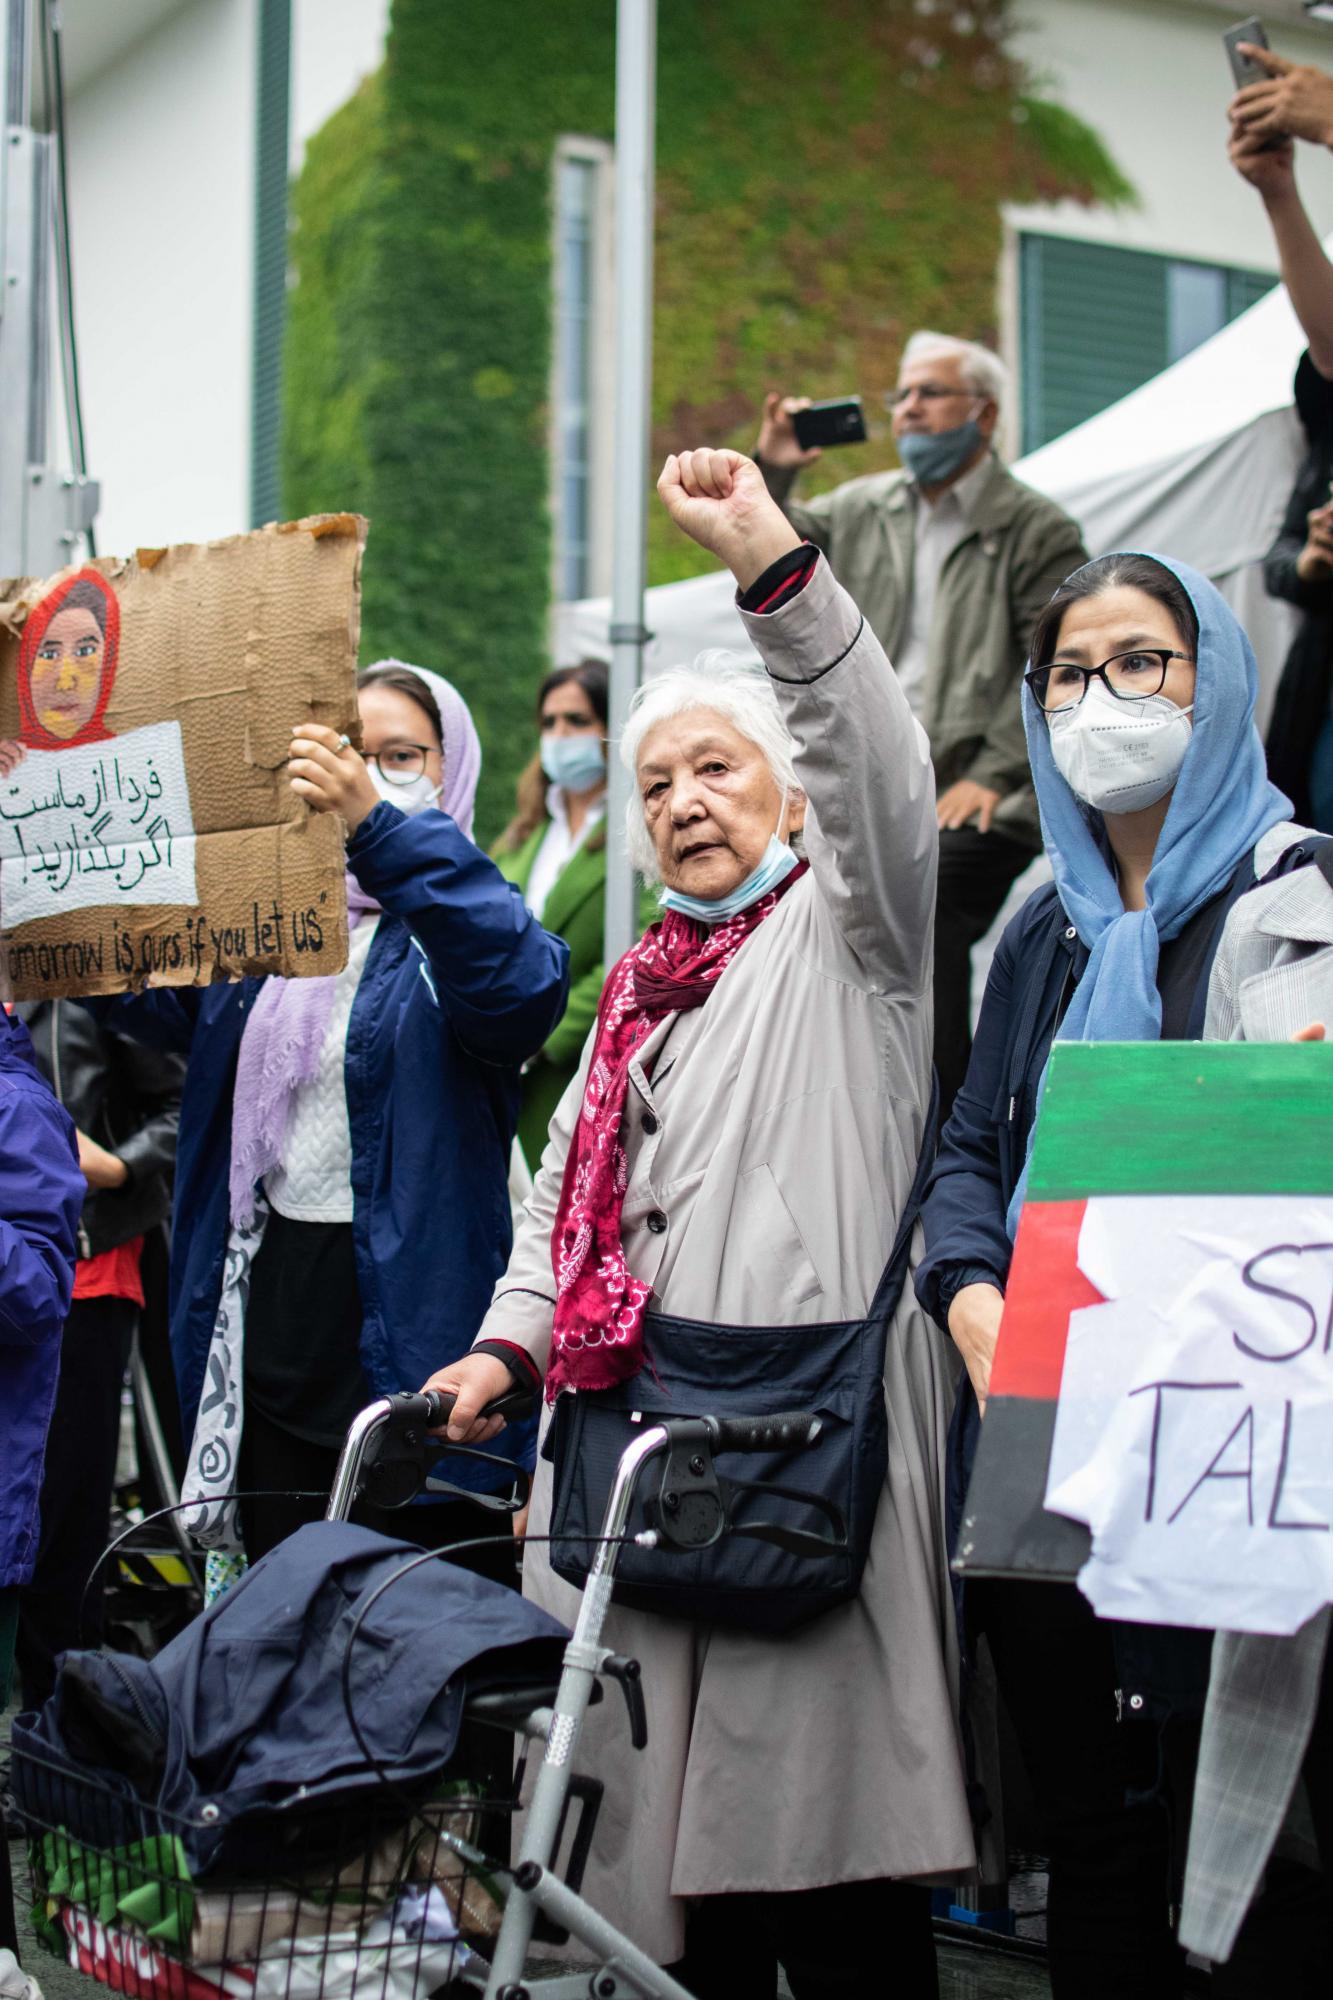 Demonstration in front of the German Chancellery in Berlin on 22.08.2021. Picture: Anna-Theresa Bachmann